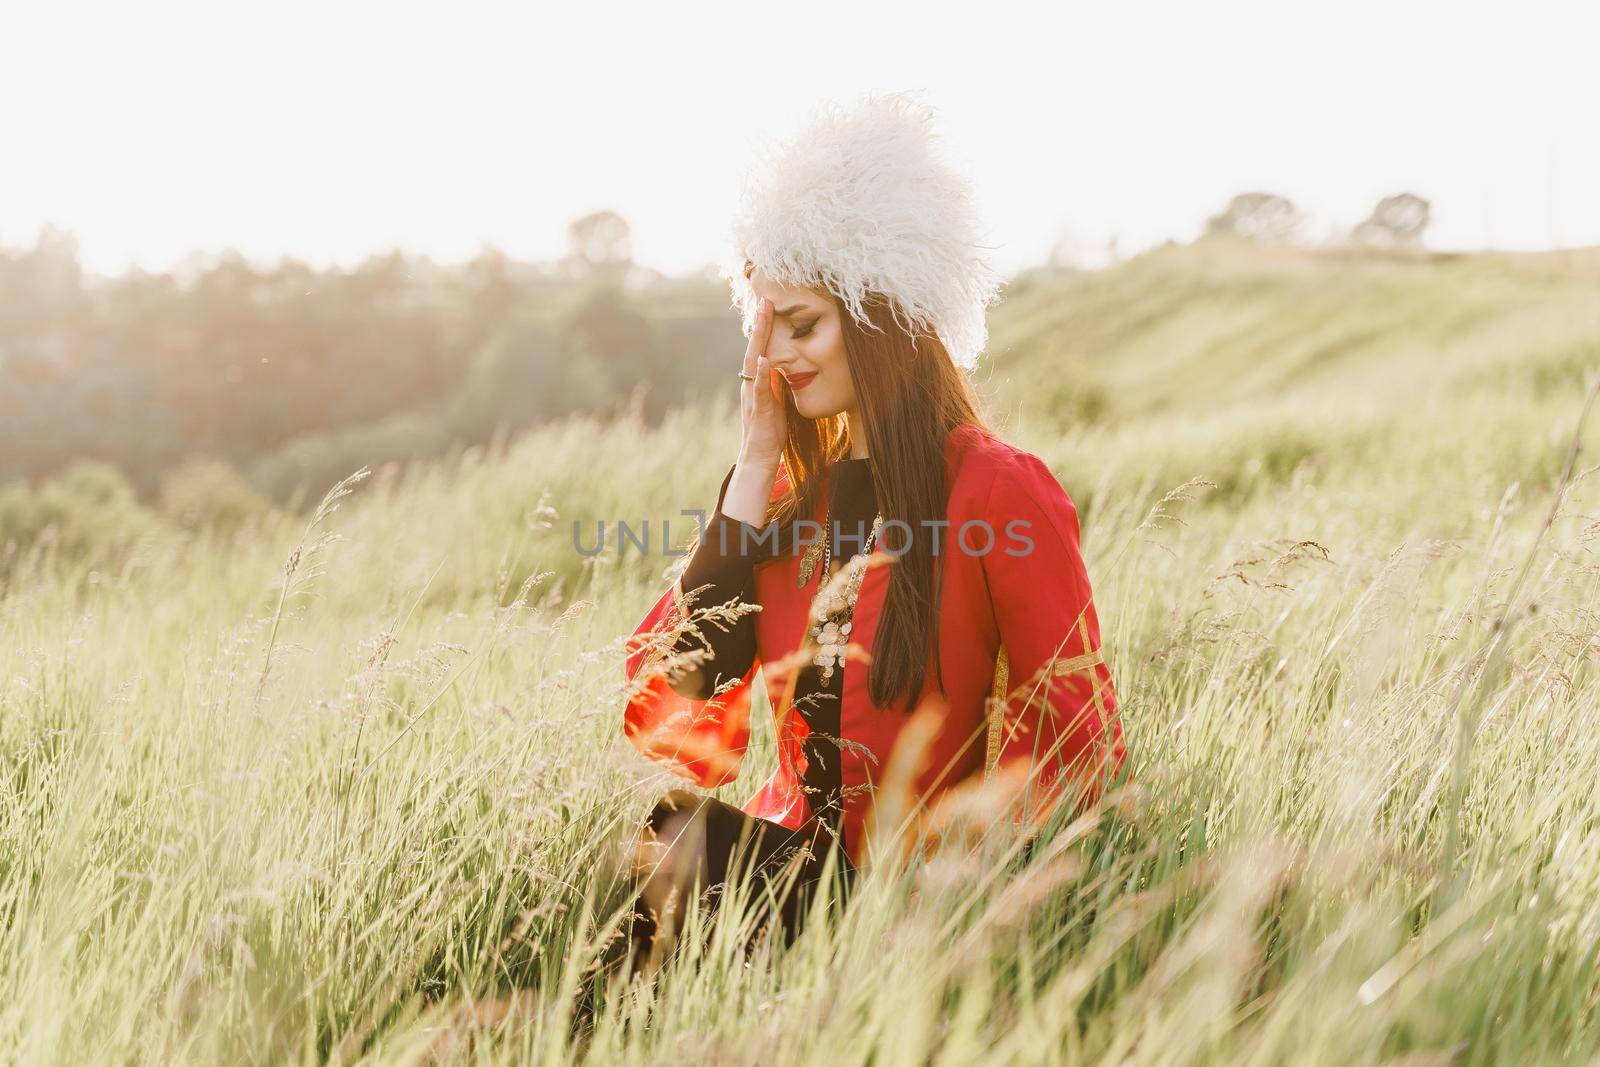 Georgian girl cry in white papakha and red national dress seats on the green grass and looks left side. Georgian culture lifestyle.